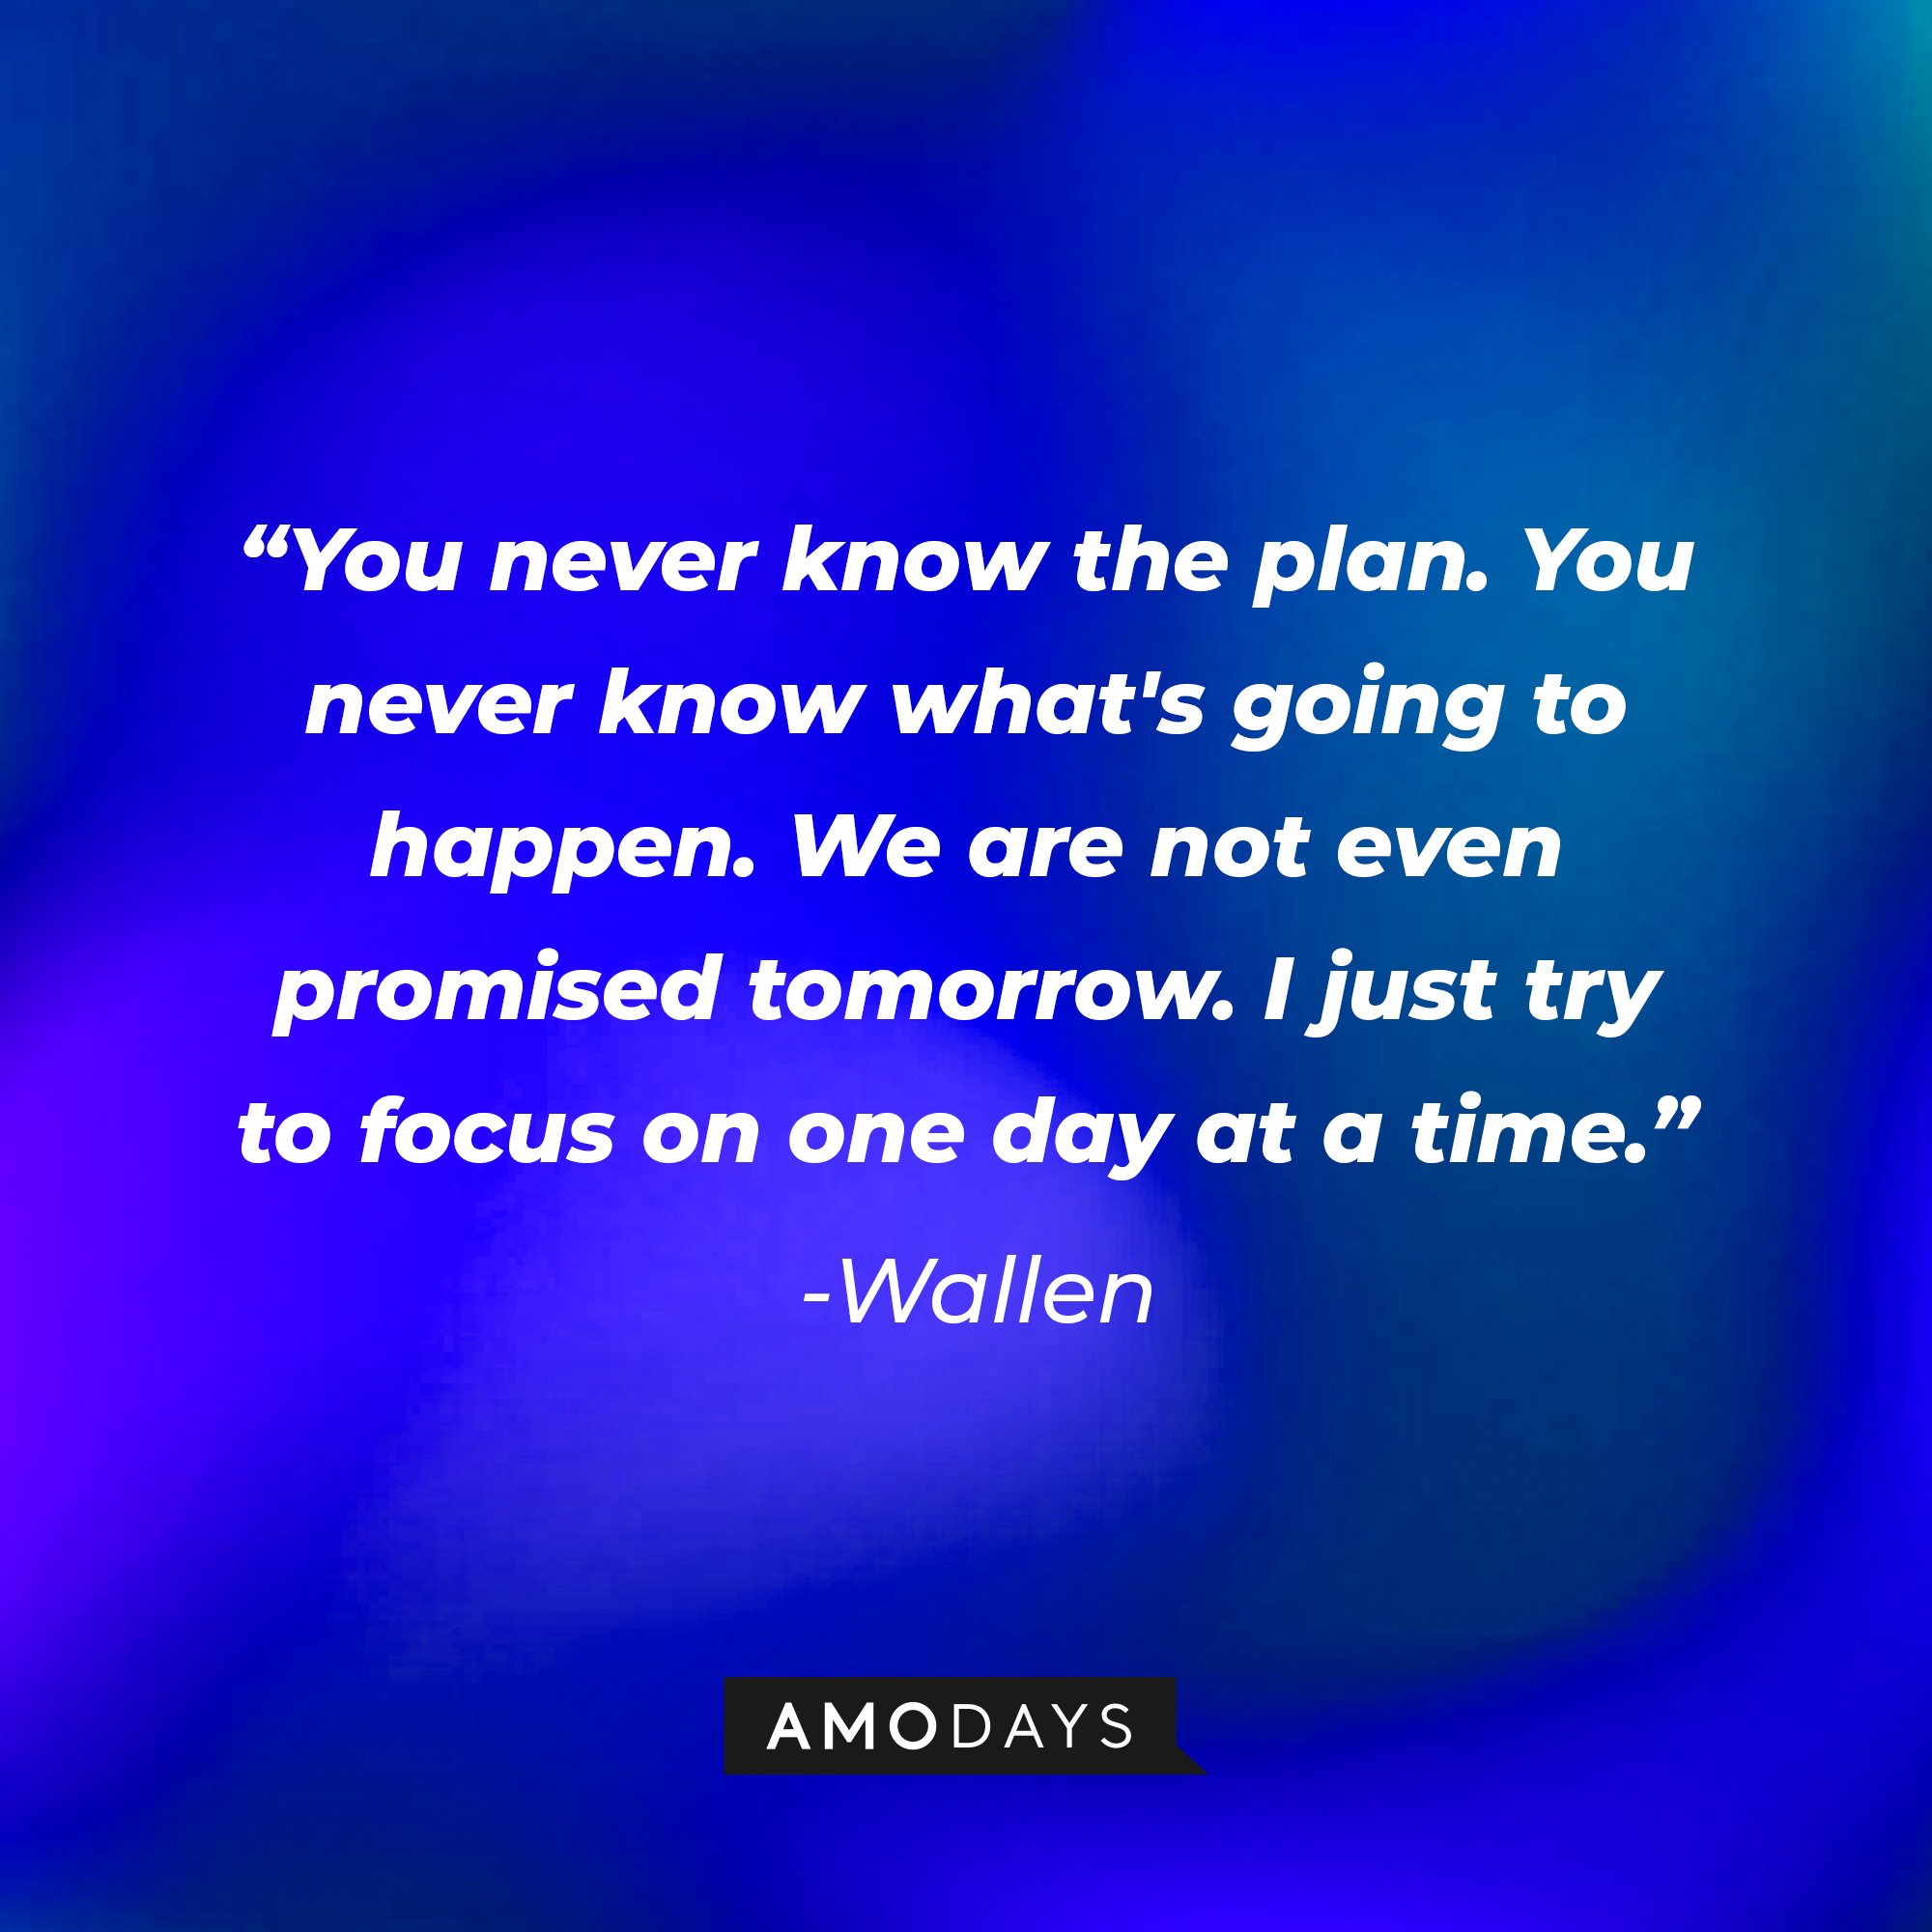 Wallen's quote: "You never know the plan. You never know what's going to happen. We are not even promised tomorrow. I just try to focus on one day at a time." | Image: AmoDays